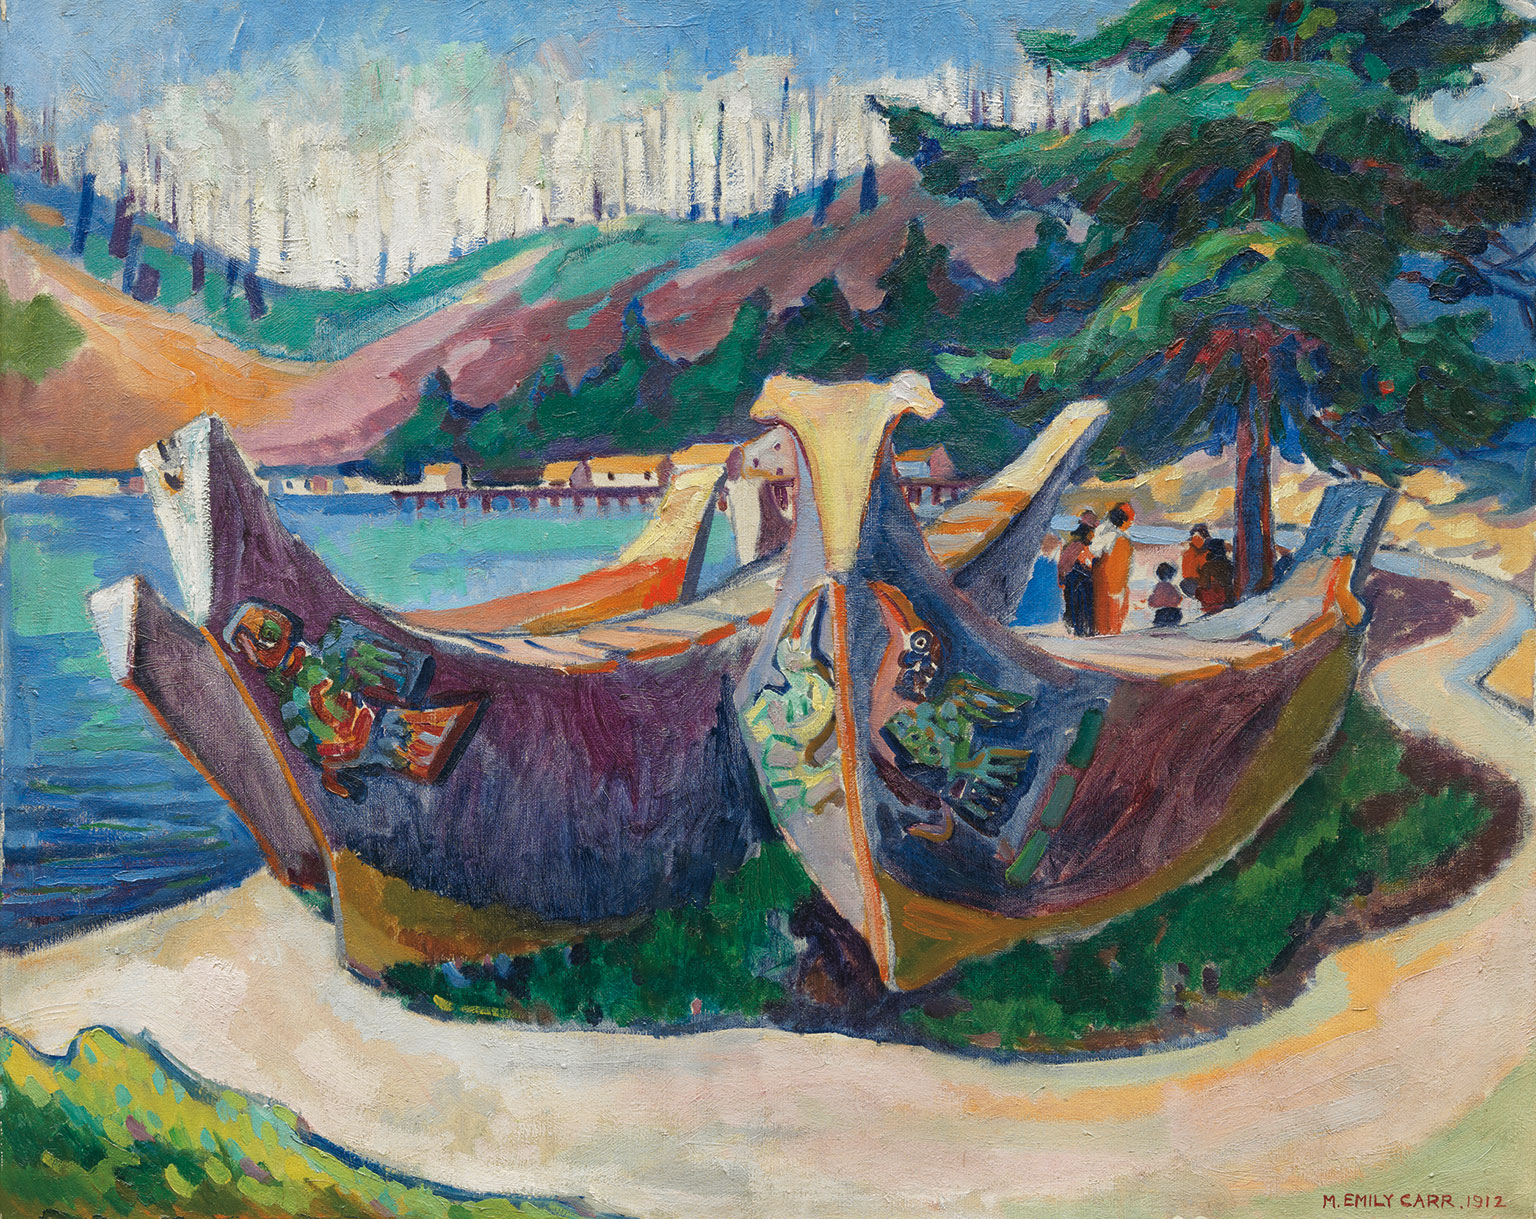 Painting by Emily Carr/courtesy of the Vancouver Art Gallery